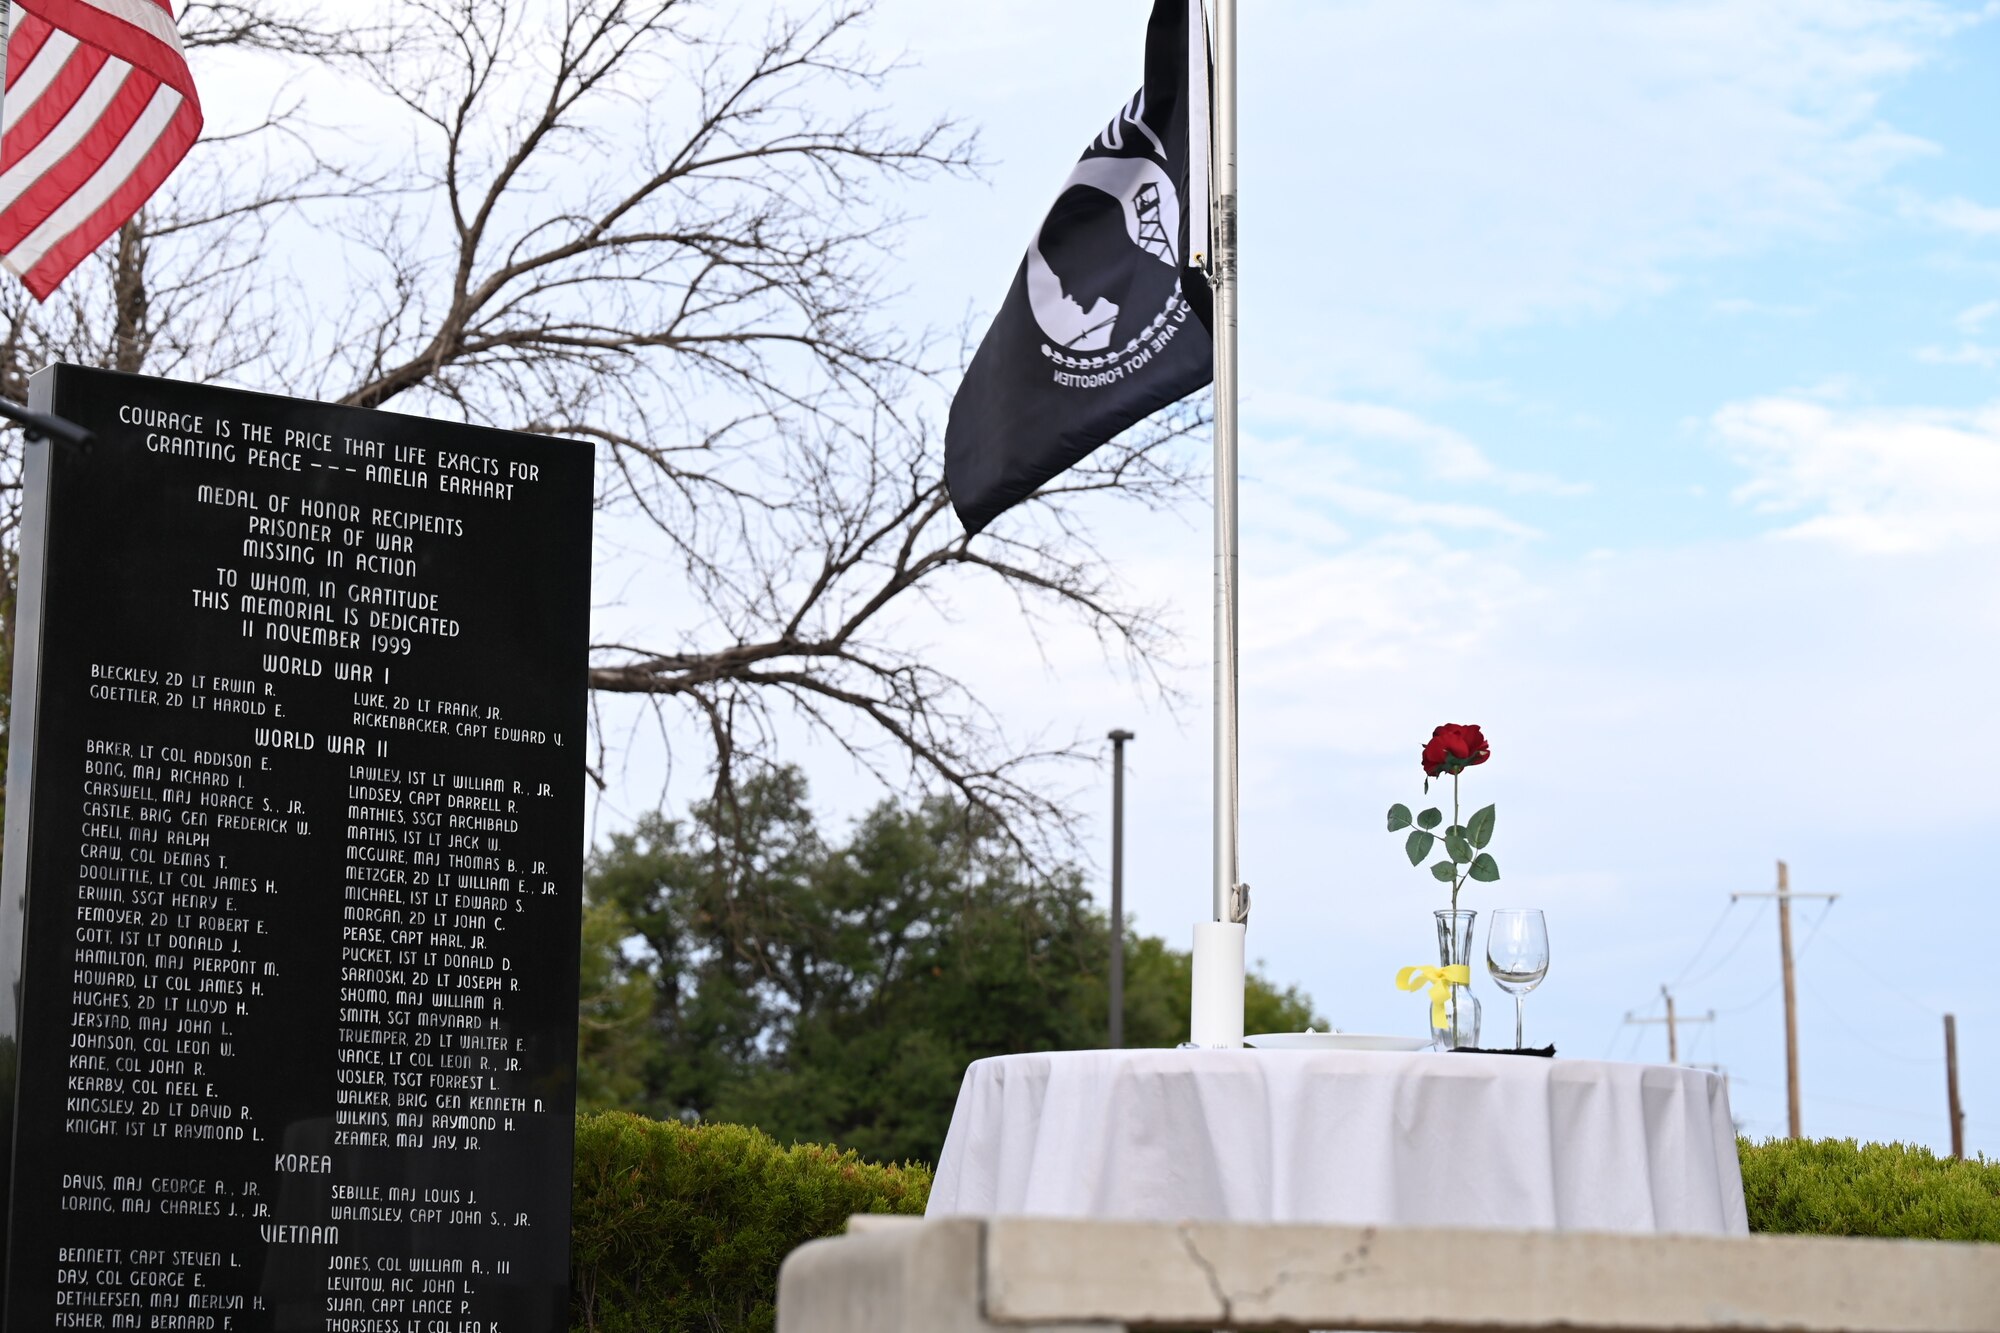 A Prisoner of War/Missing in Action table displayed during the POW/MIA Recognition Day closing ceremony at the POW/MIA/Medal of Honor Memorial, Goodfellow Air Force Base, Texas, Sept. 15, 2023. The event included an opening ceremony, a 24-hour run and a closing ceremony for POW/MIA Recognition Day.